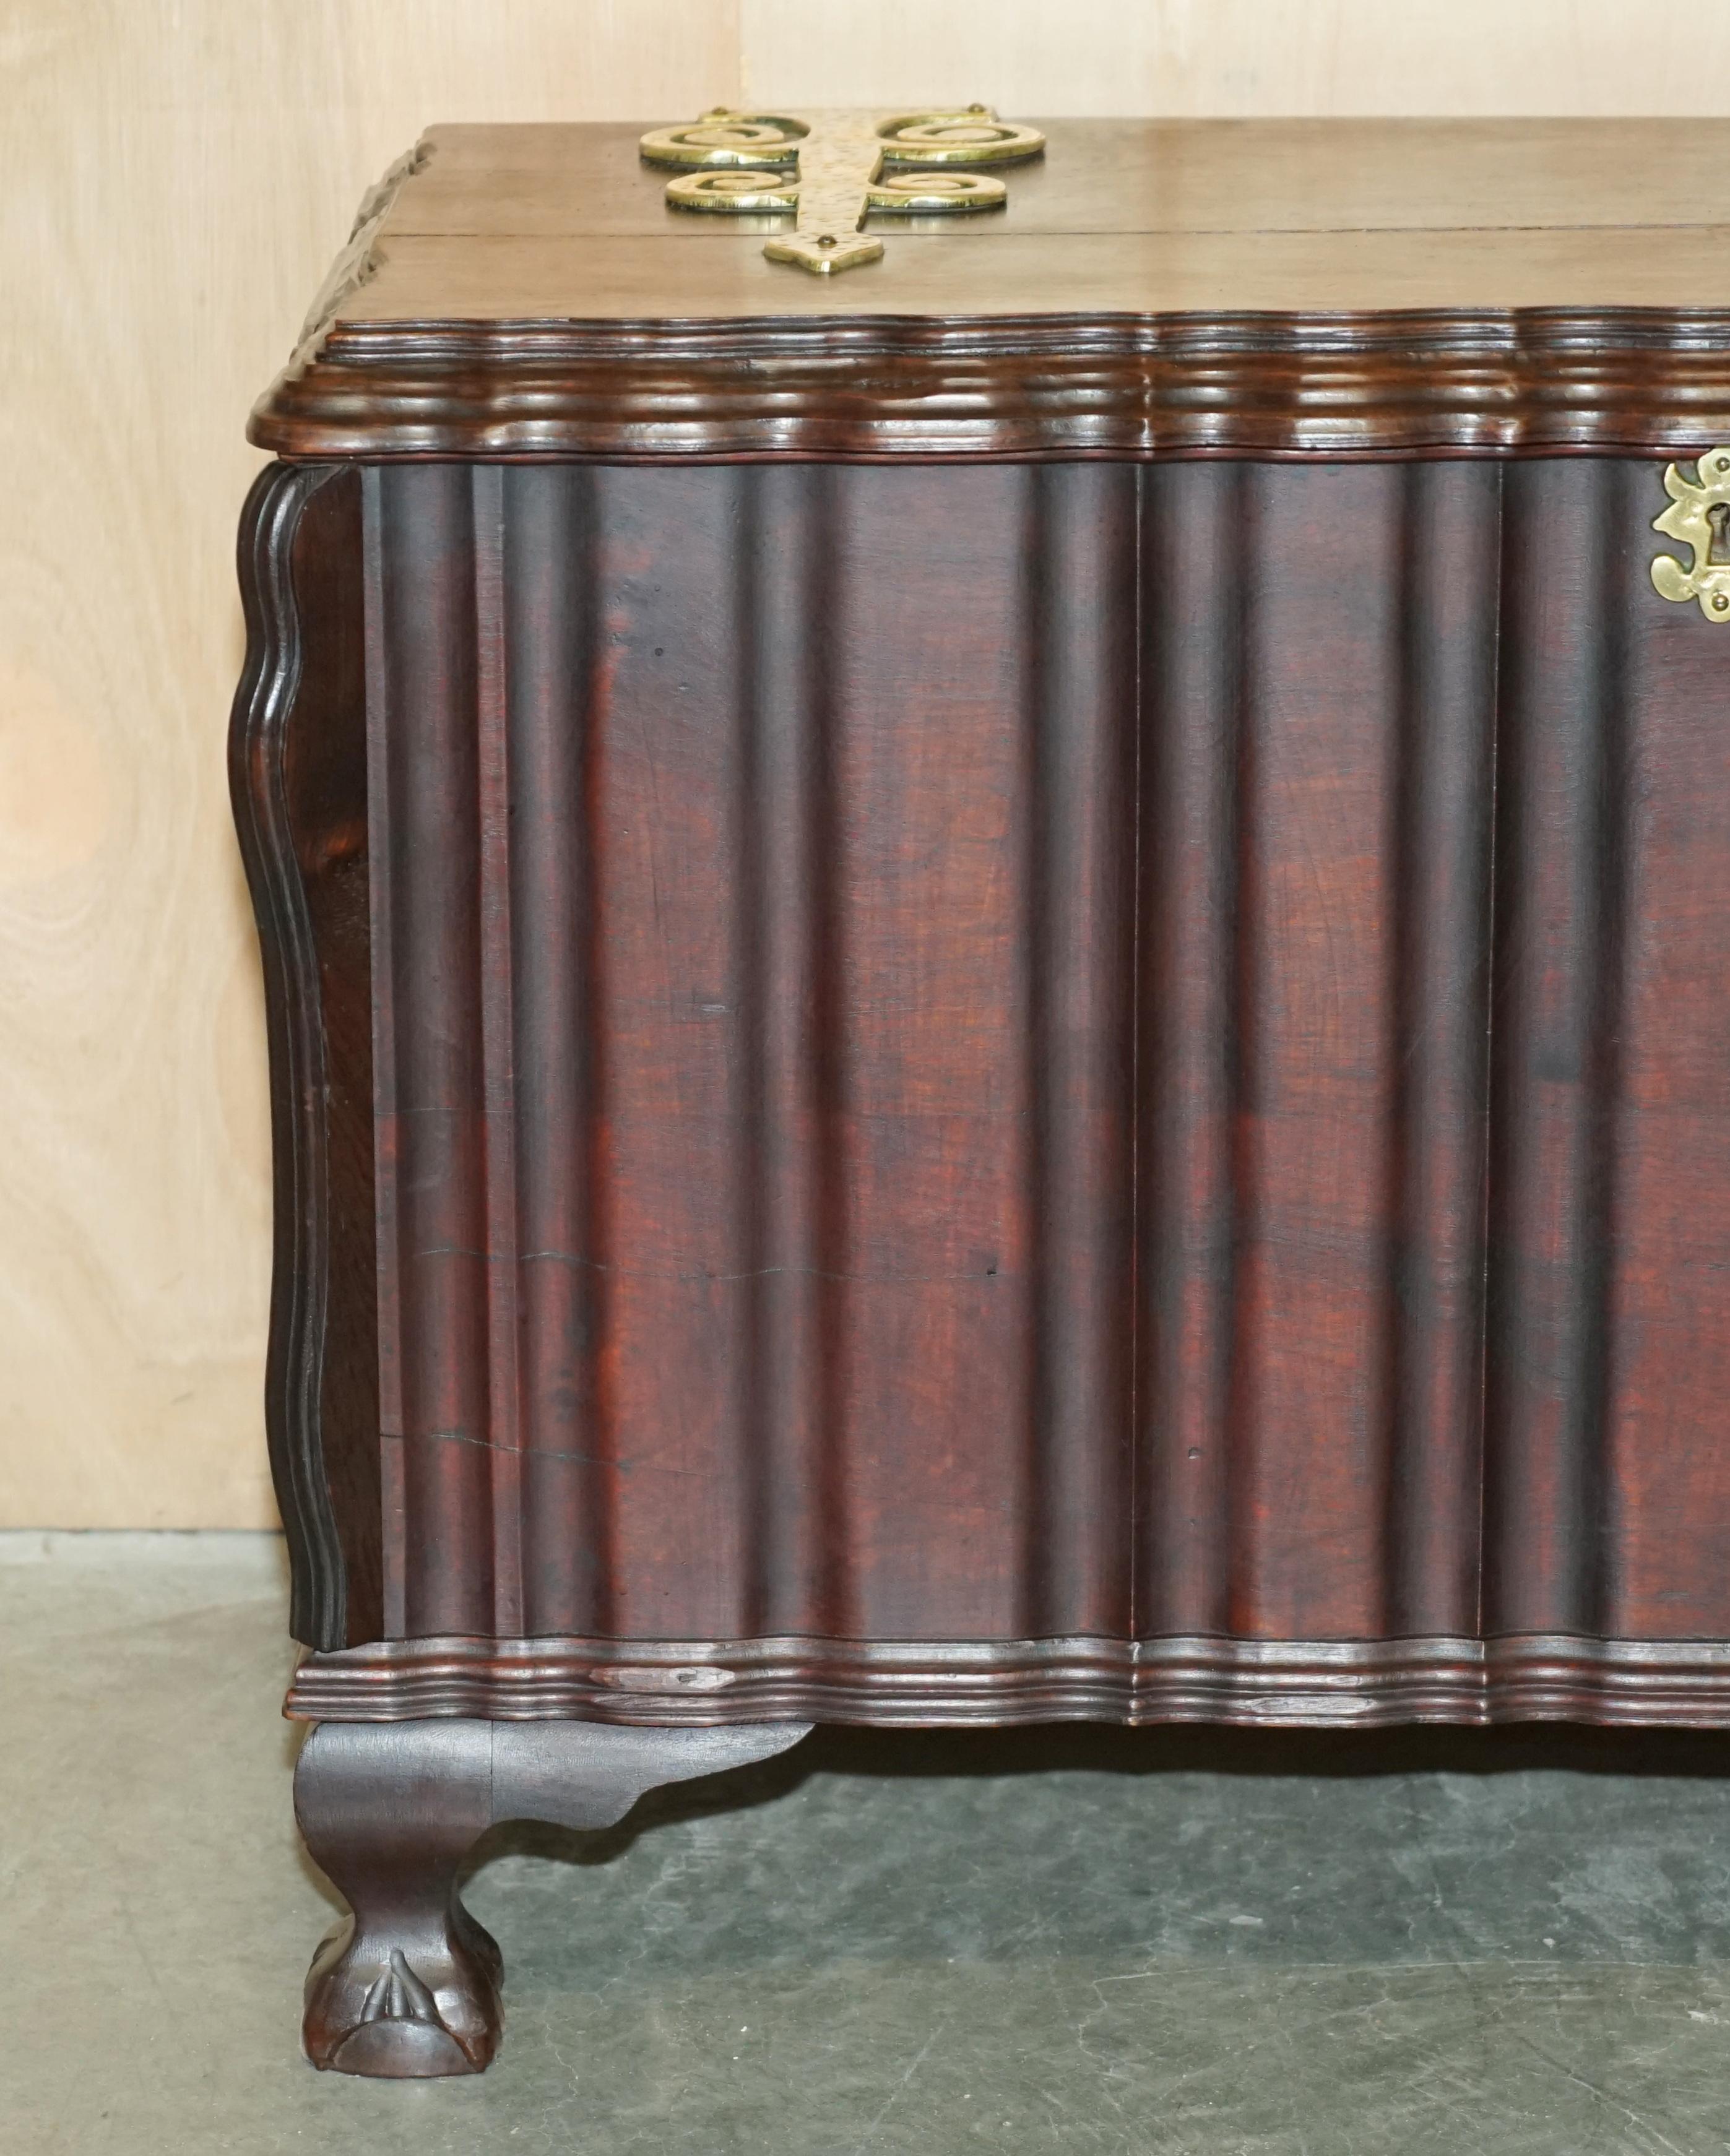 ViNTAGE HAND CARved HARDWOOD TRUNK OR CHEST WITH ORNATE OVERSIZED BRASS FITTINGS (Englisch) im Angebot